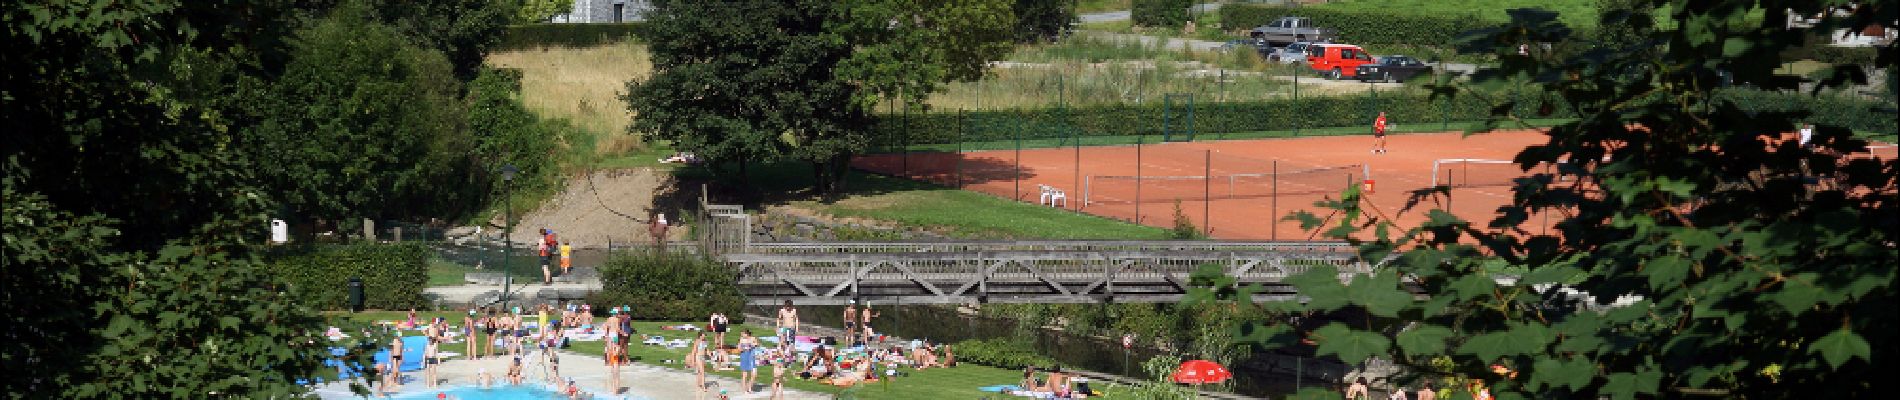 POI Rochefort - Parc des Roches (listed park with swimming pool, mini-golf, playground, tennis...) - Photo